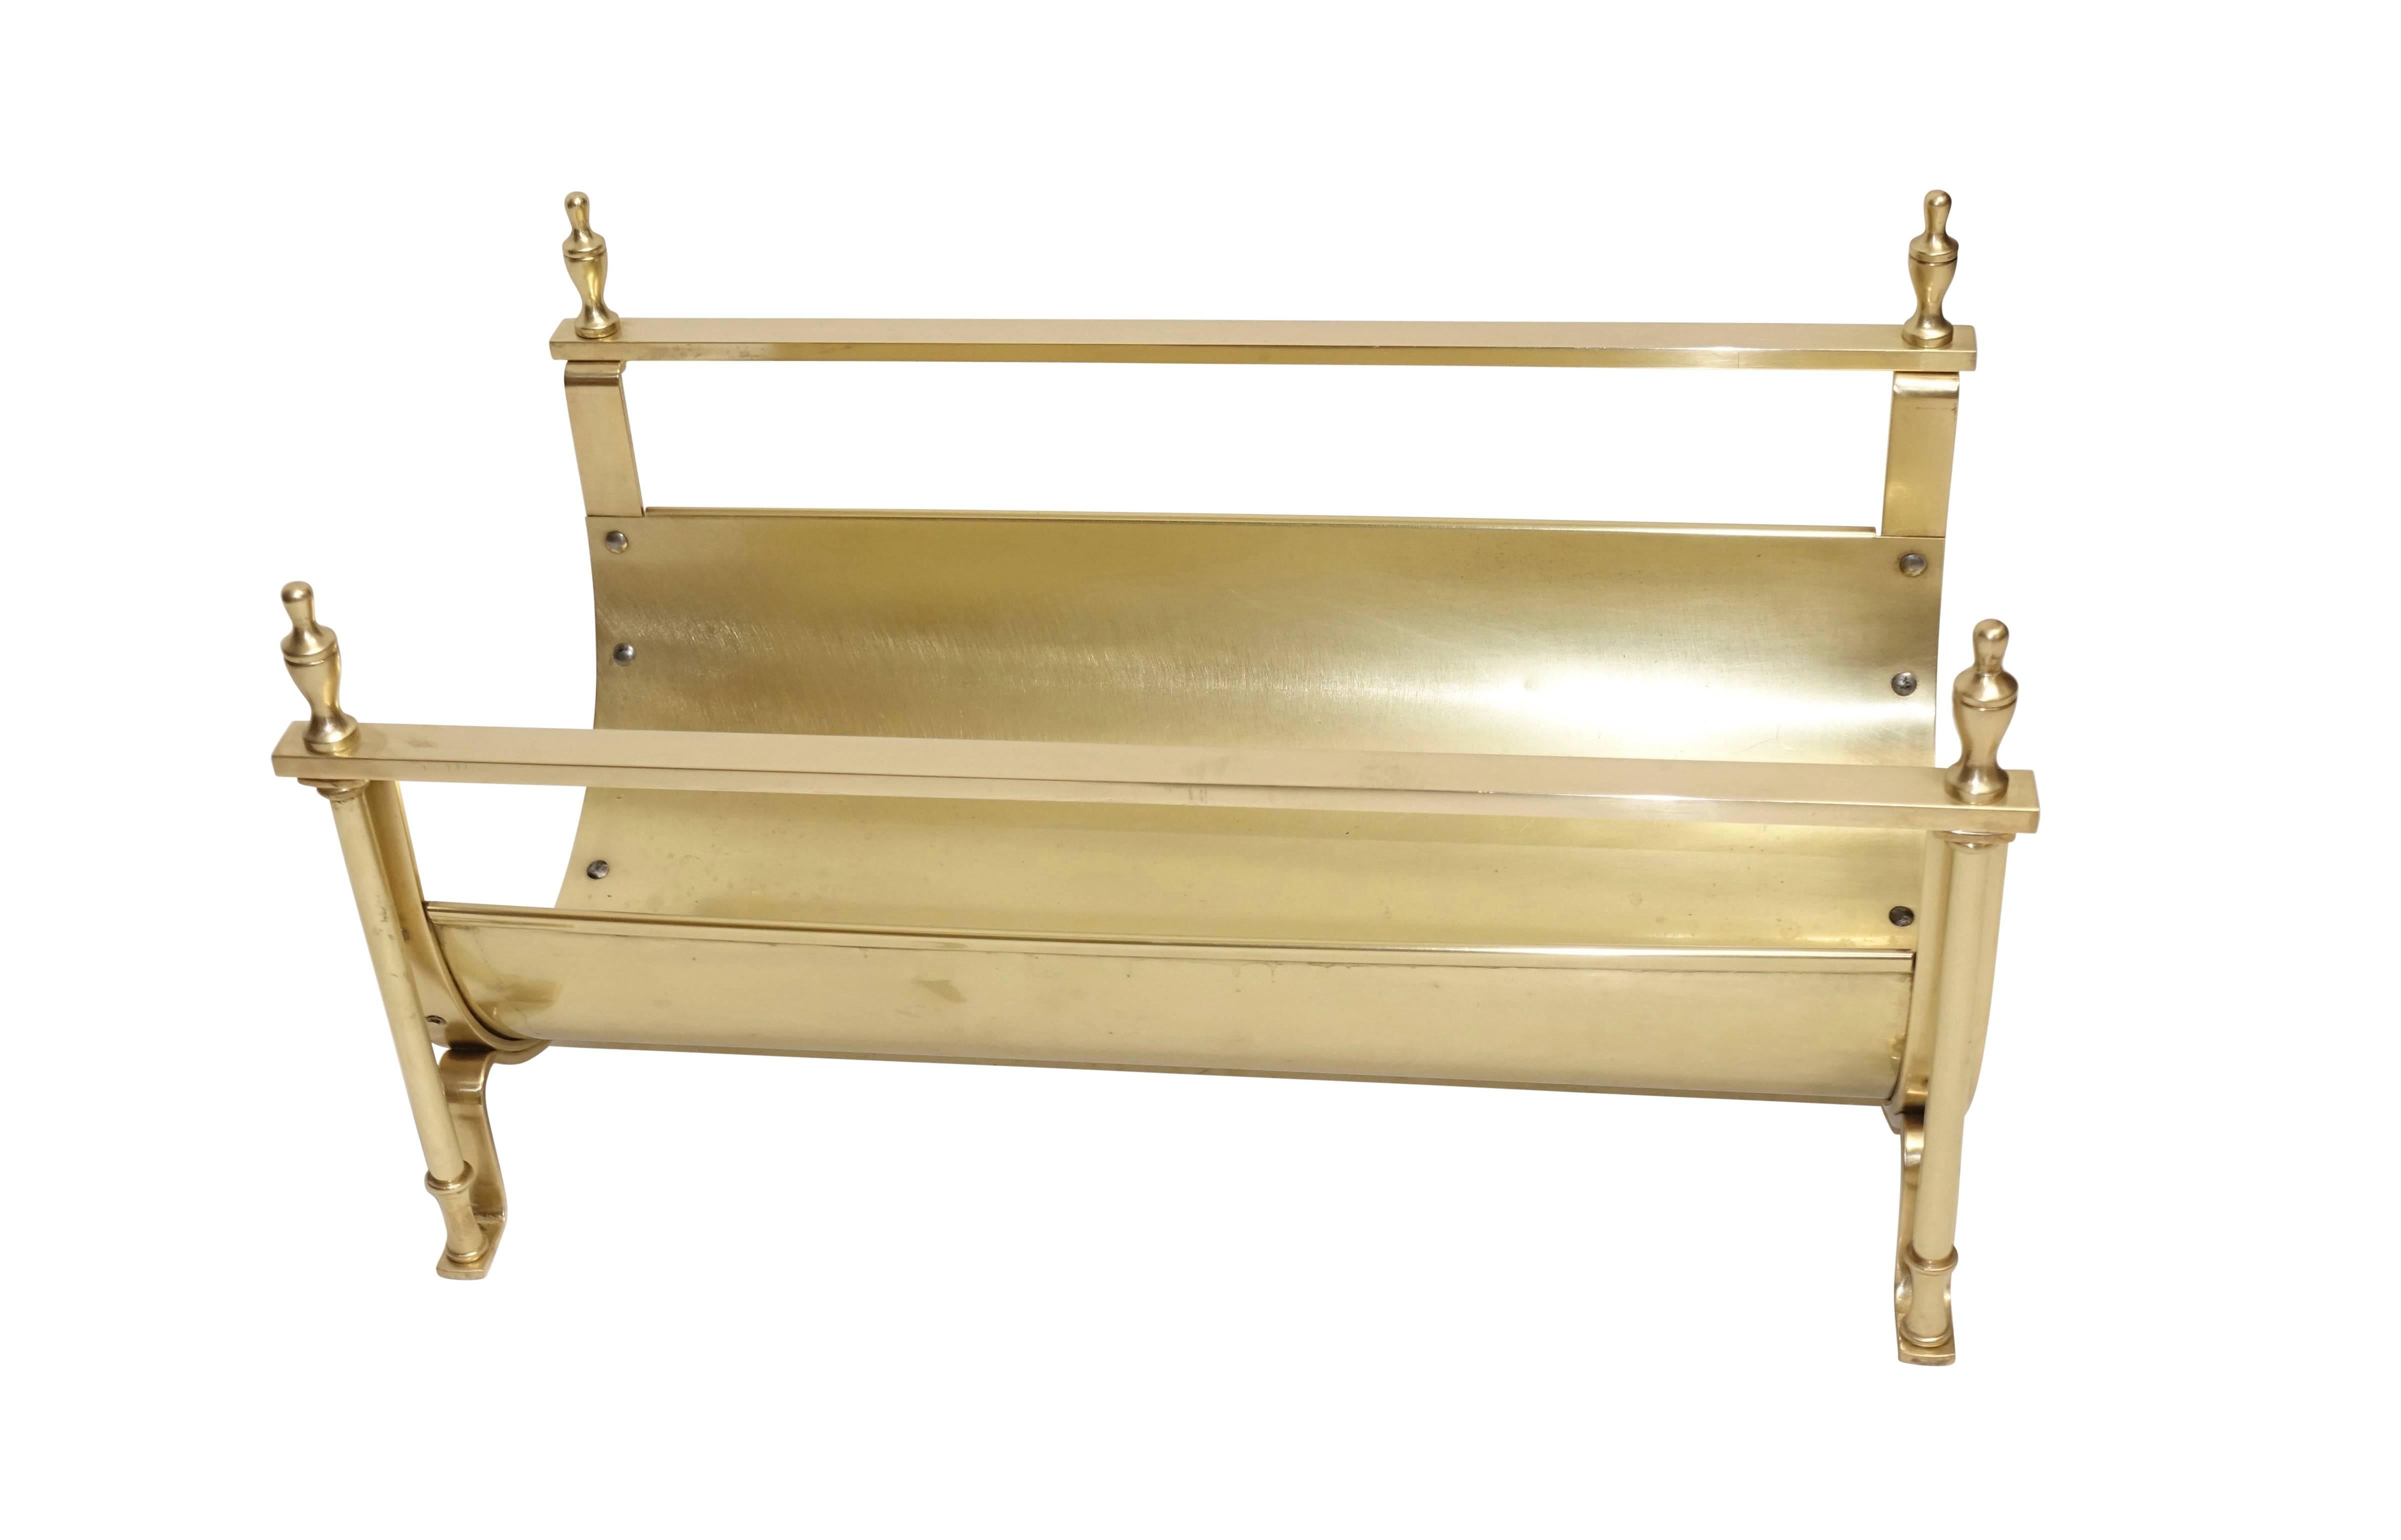 For the fireplace a brass log holder in the neoclassical style with urn shape finials, American, early 20th century.